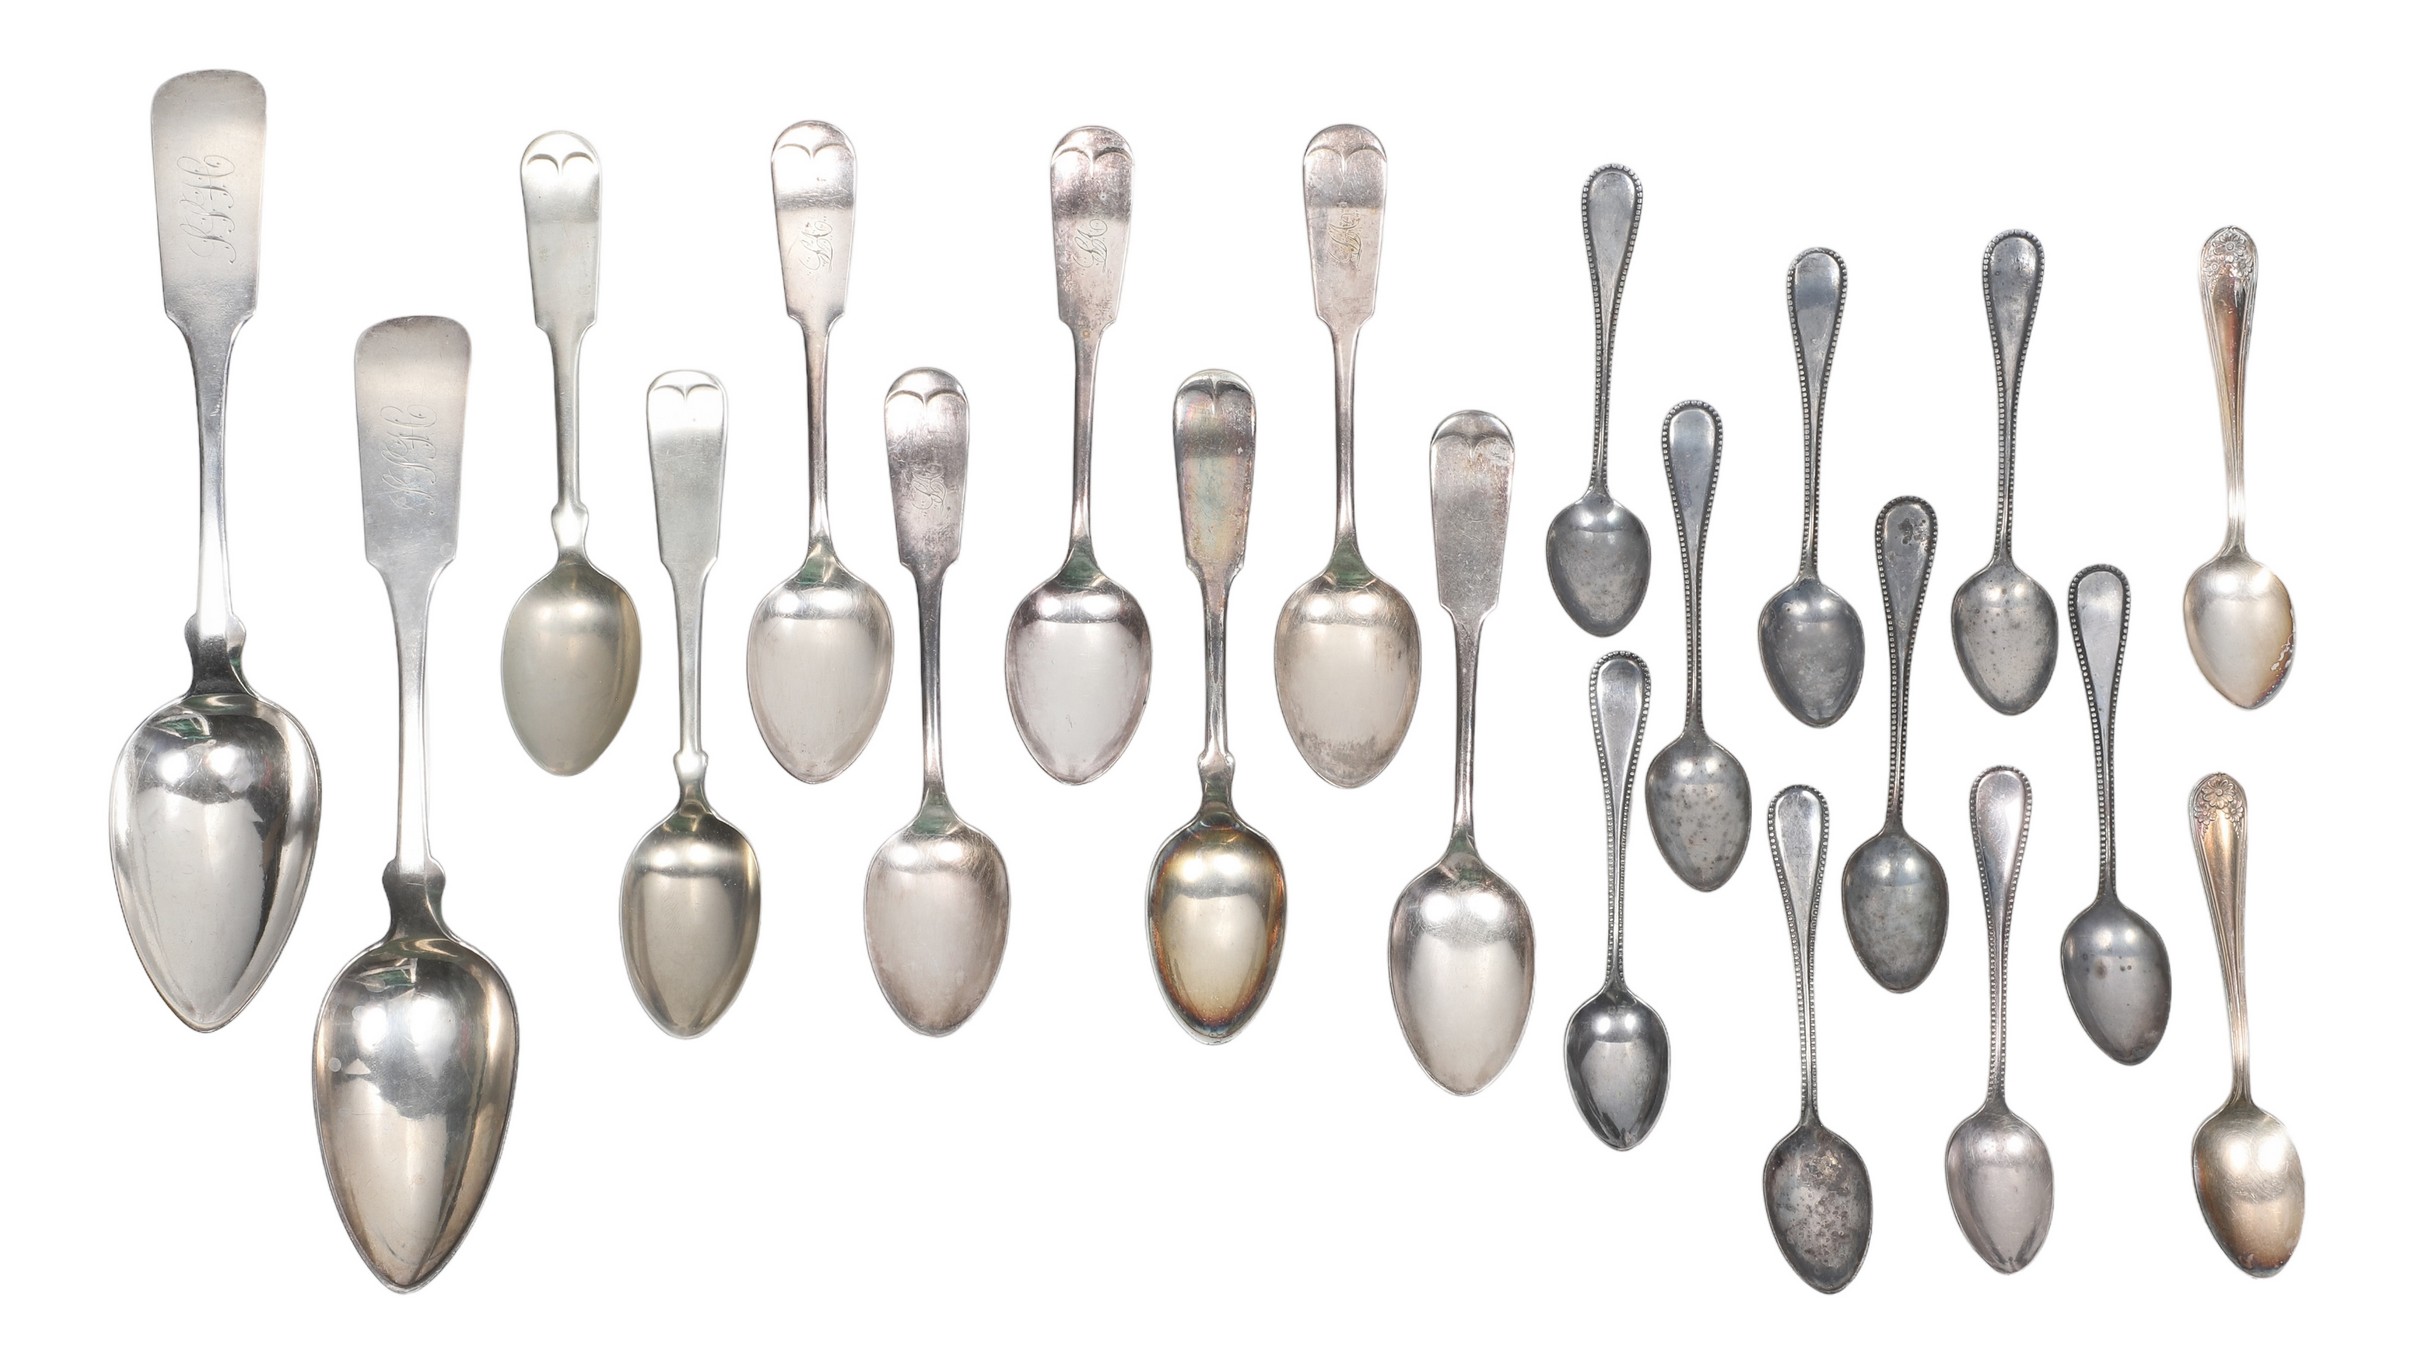 Silver spoons and silverplate to 2e0b72